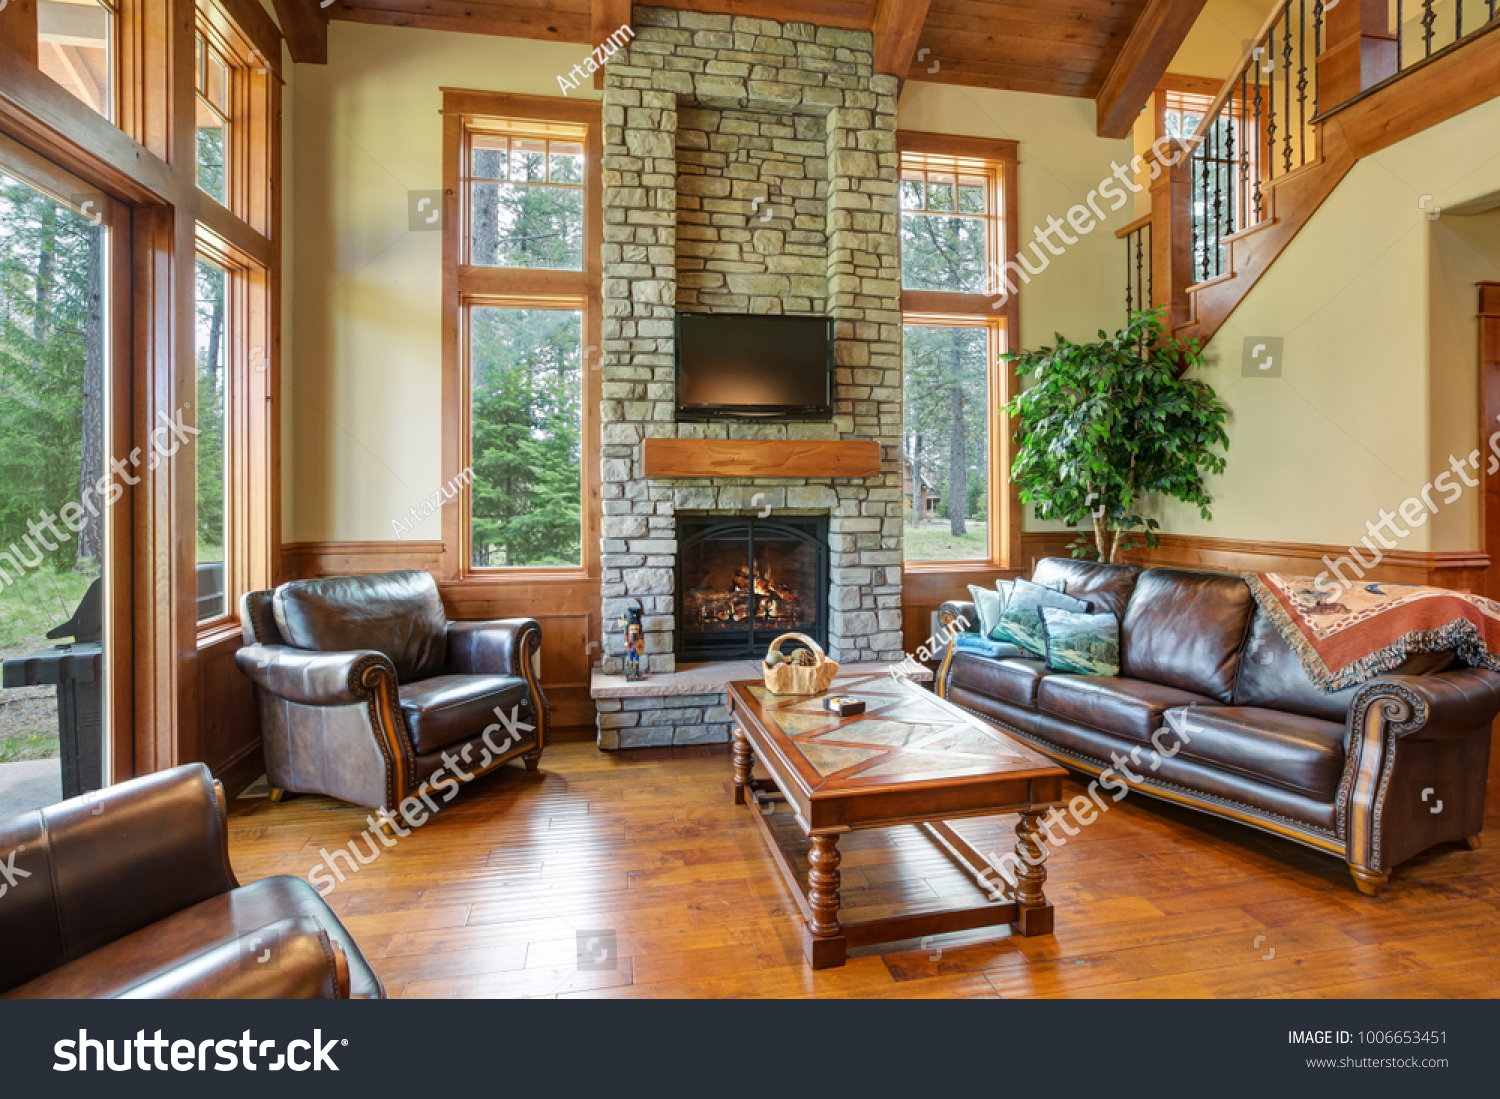 Stunning Living Room Design Includes Stone Stock Photo Edit Now 1006653451